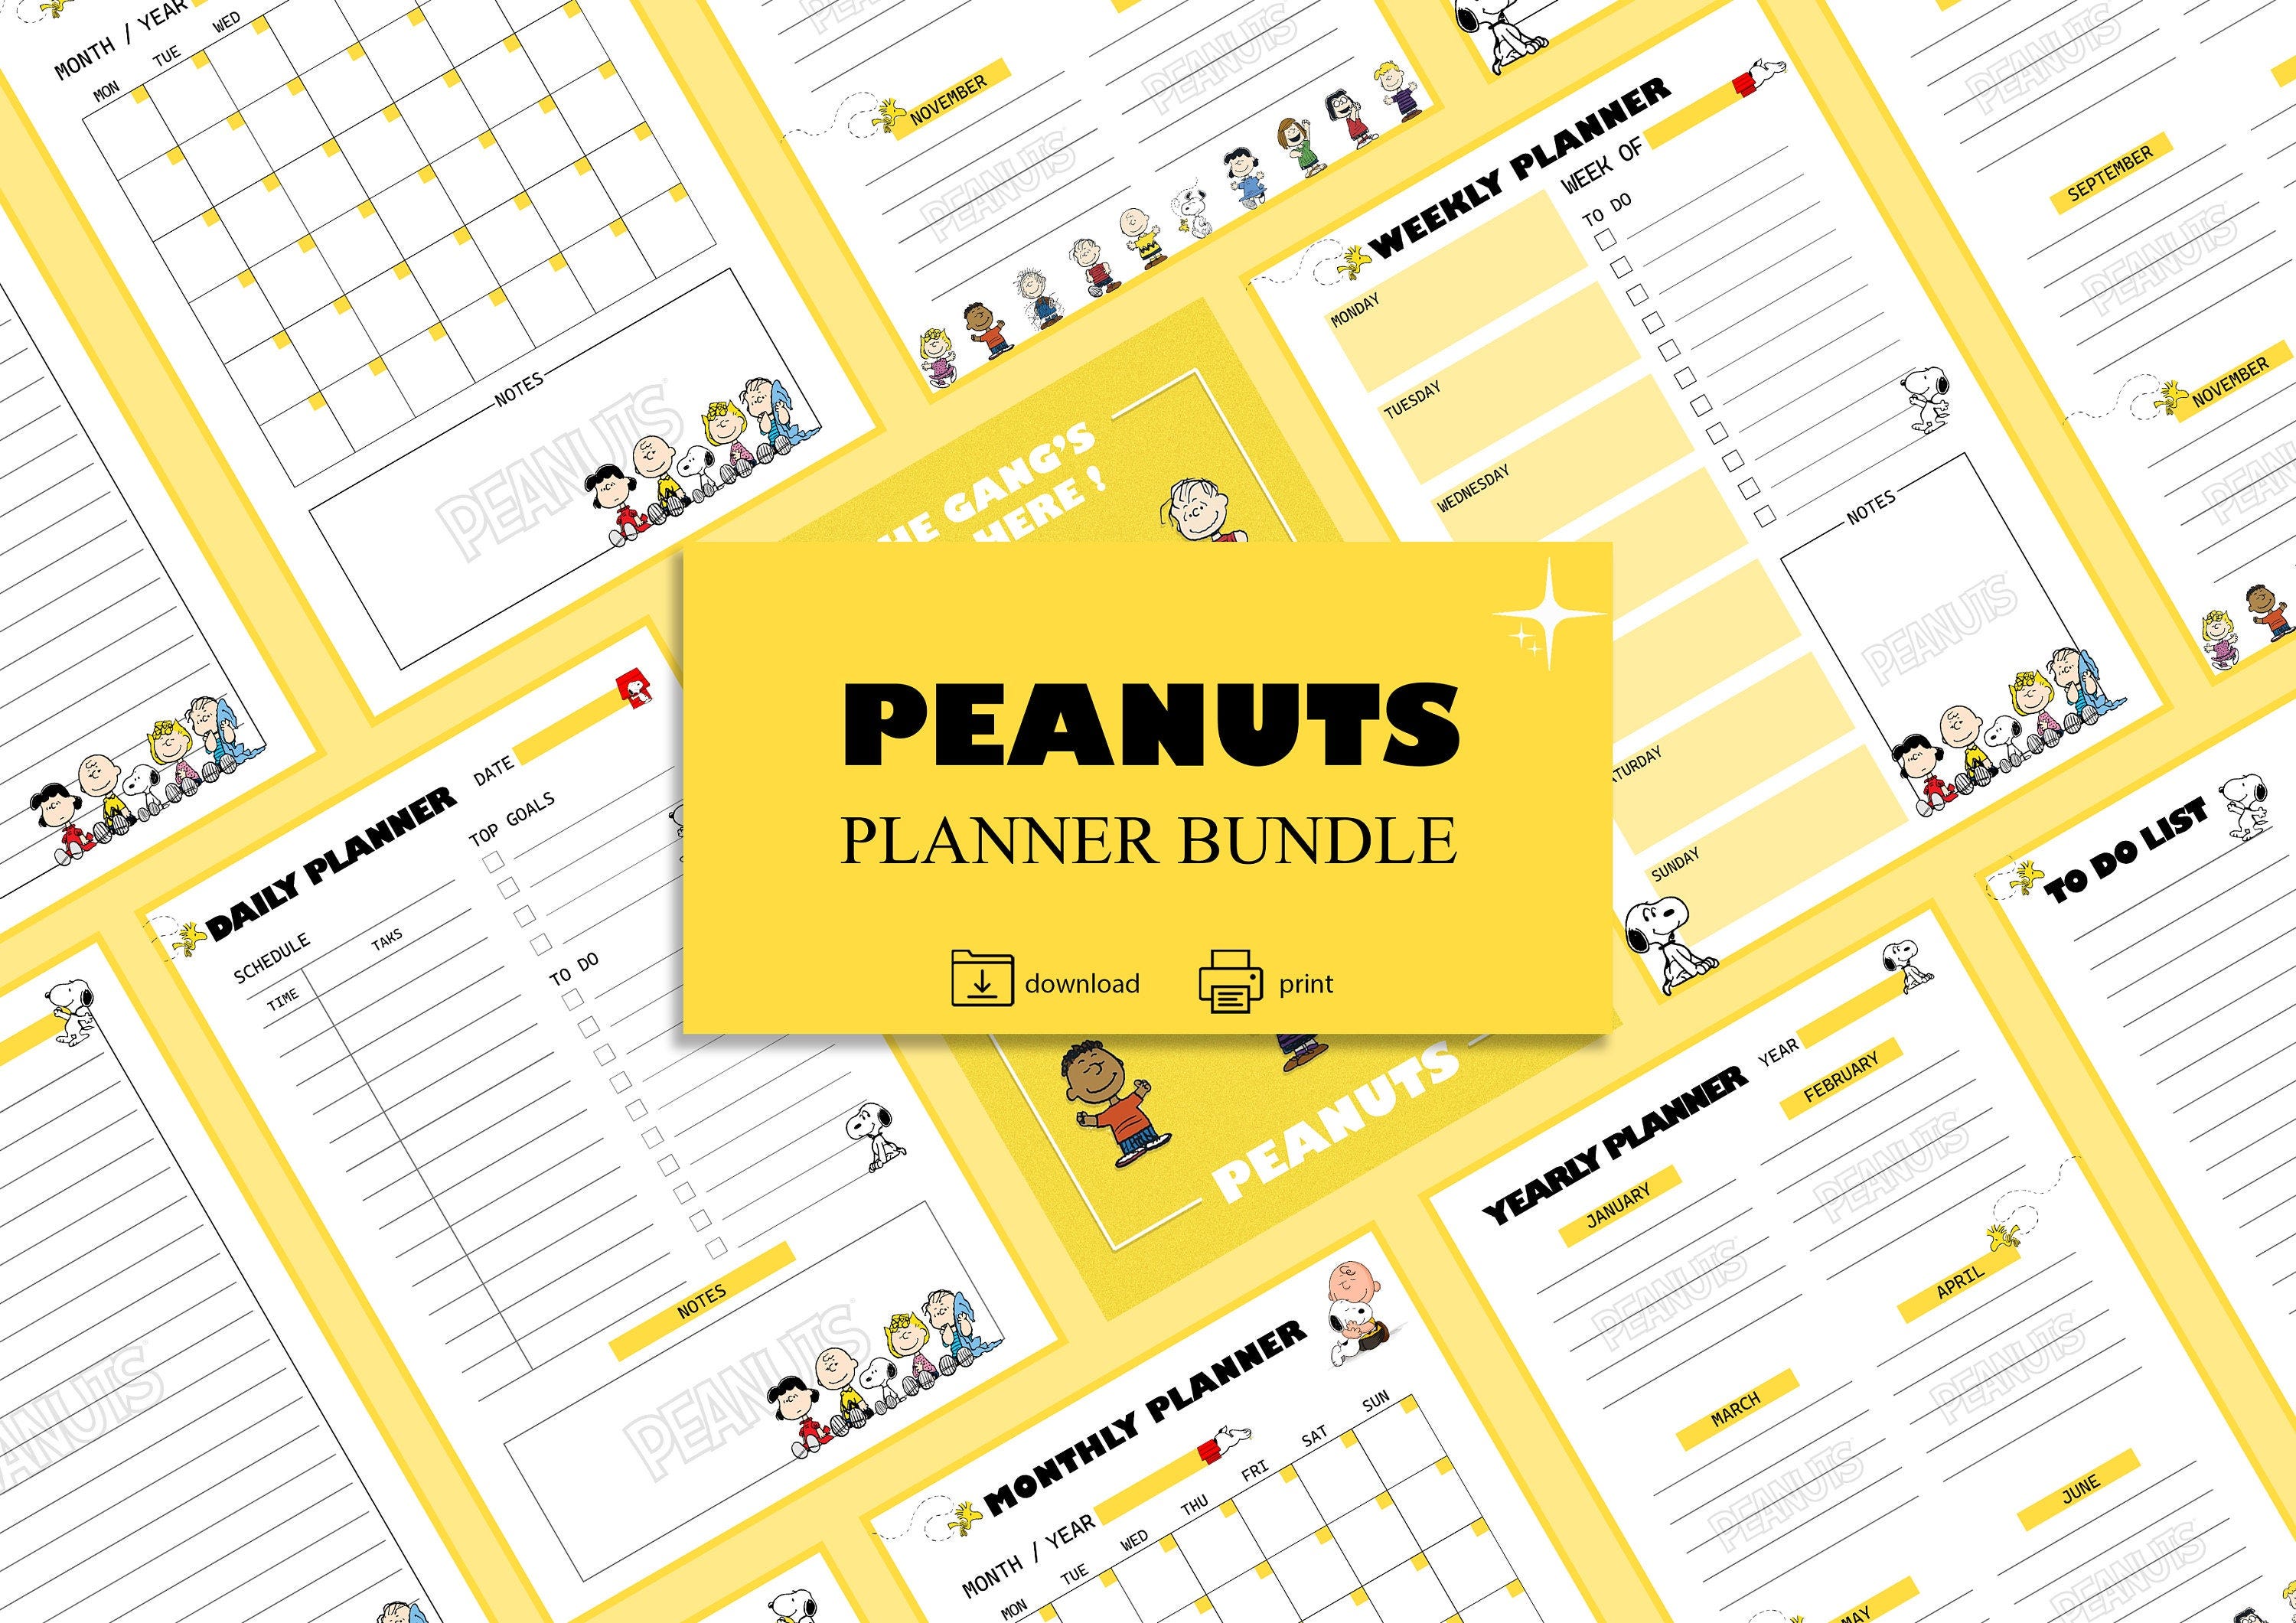 Peanuts Planner, Snoopy Planner, Printable Planner Bundle, Task Planner, Daily Weekly Monthly Planner, Digital Download, A5, A4 size